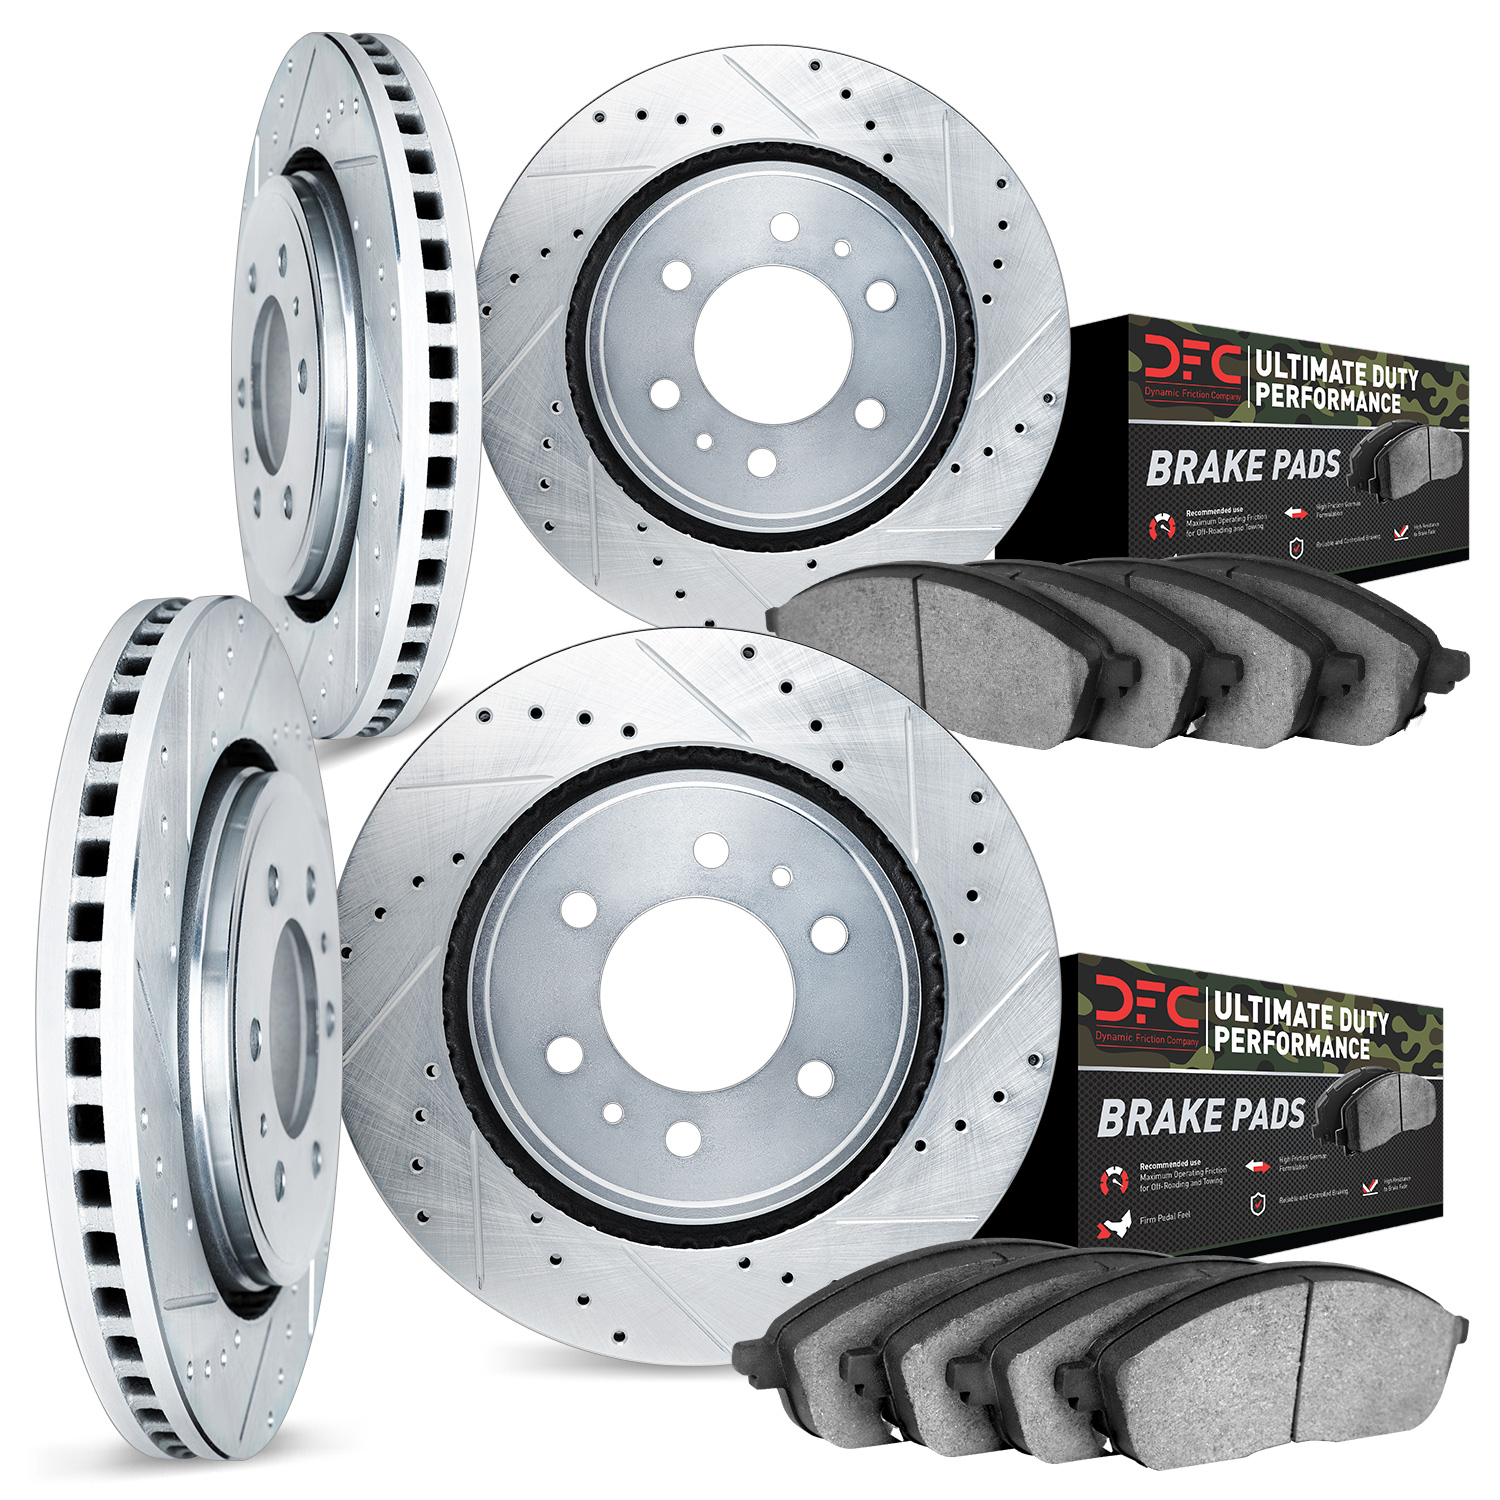 7404-48014 Drilled/Slotted Brake Rotors with Ultimate-Duty Brake Pads Kit [Silver], 2007-2008 GM, Position: Front and Rear